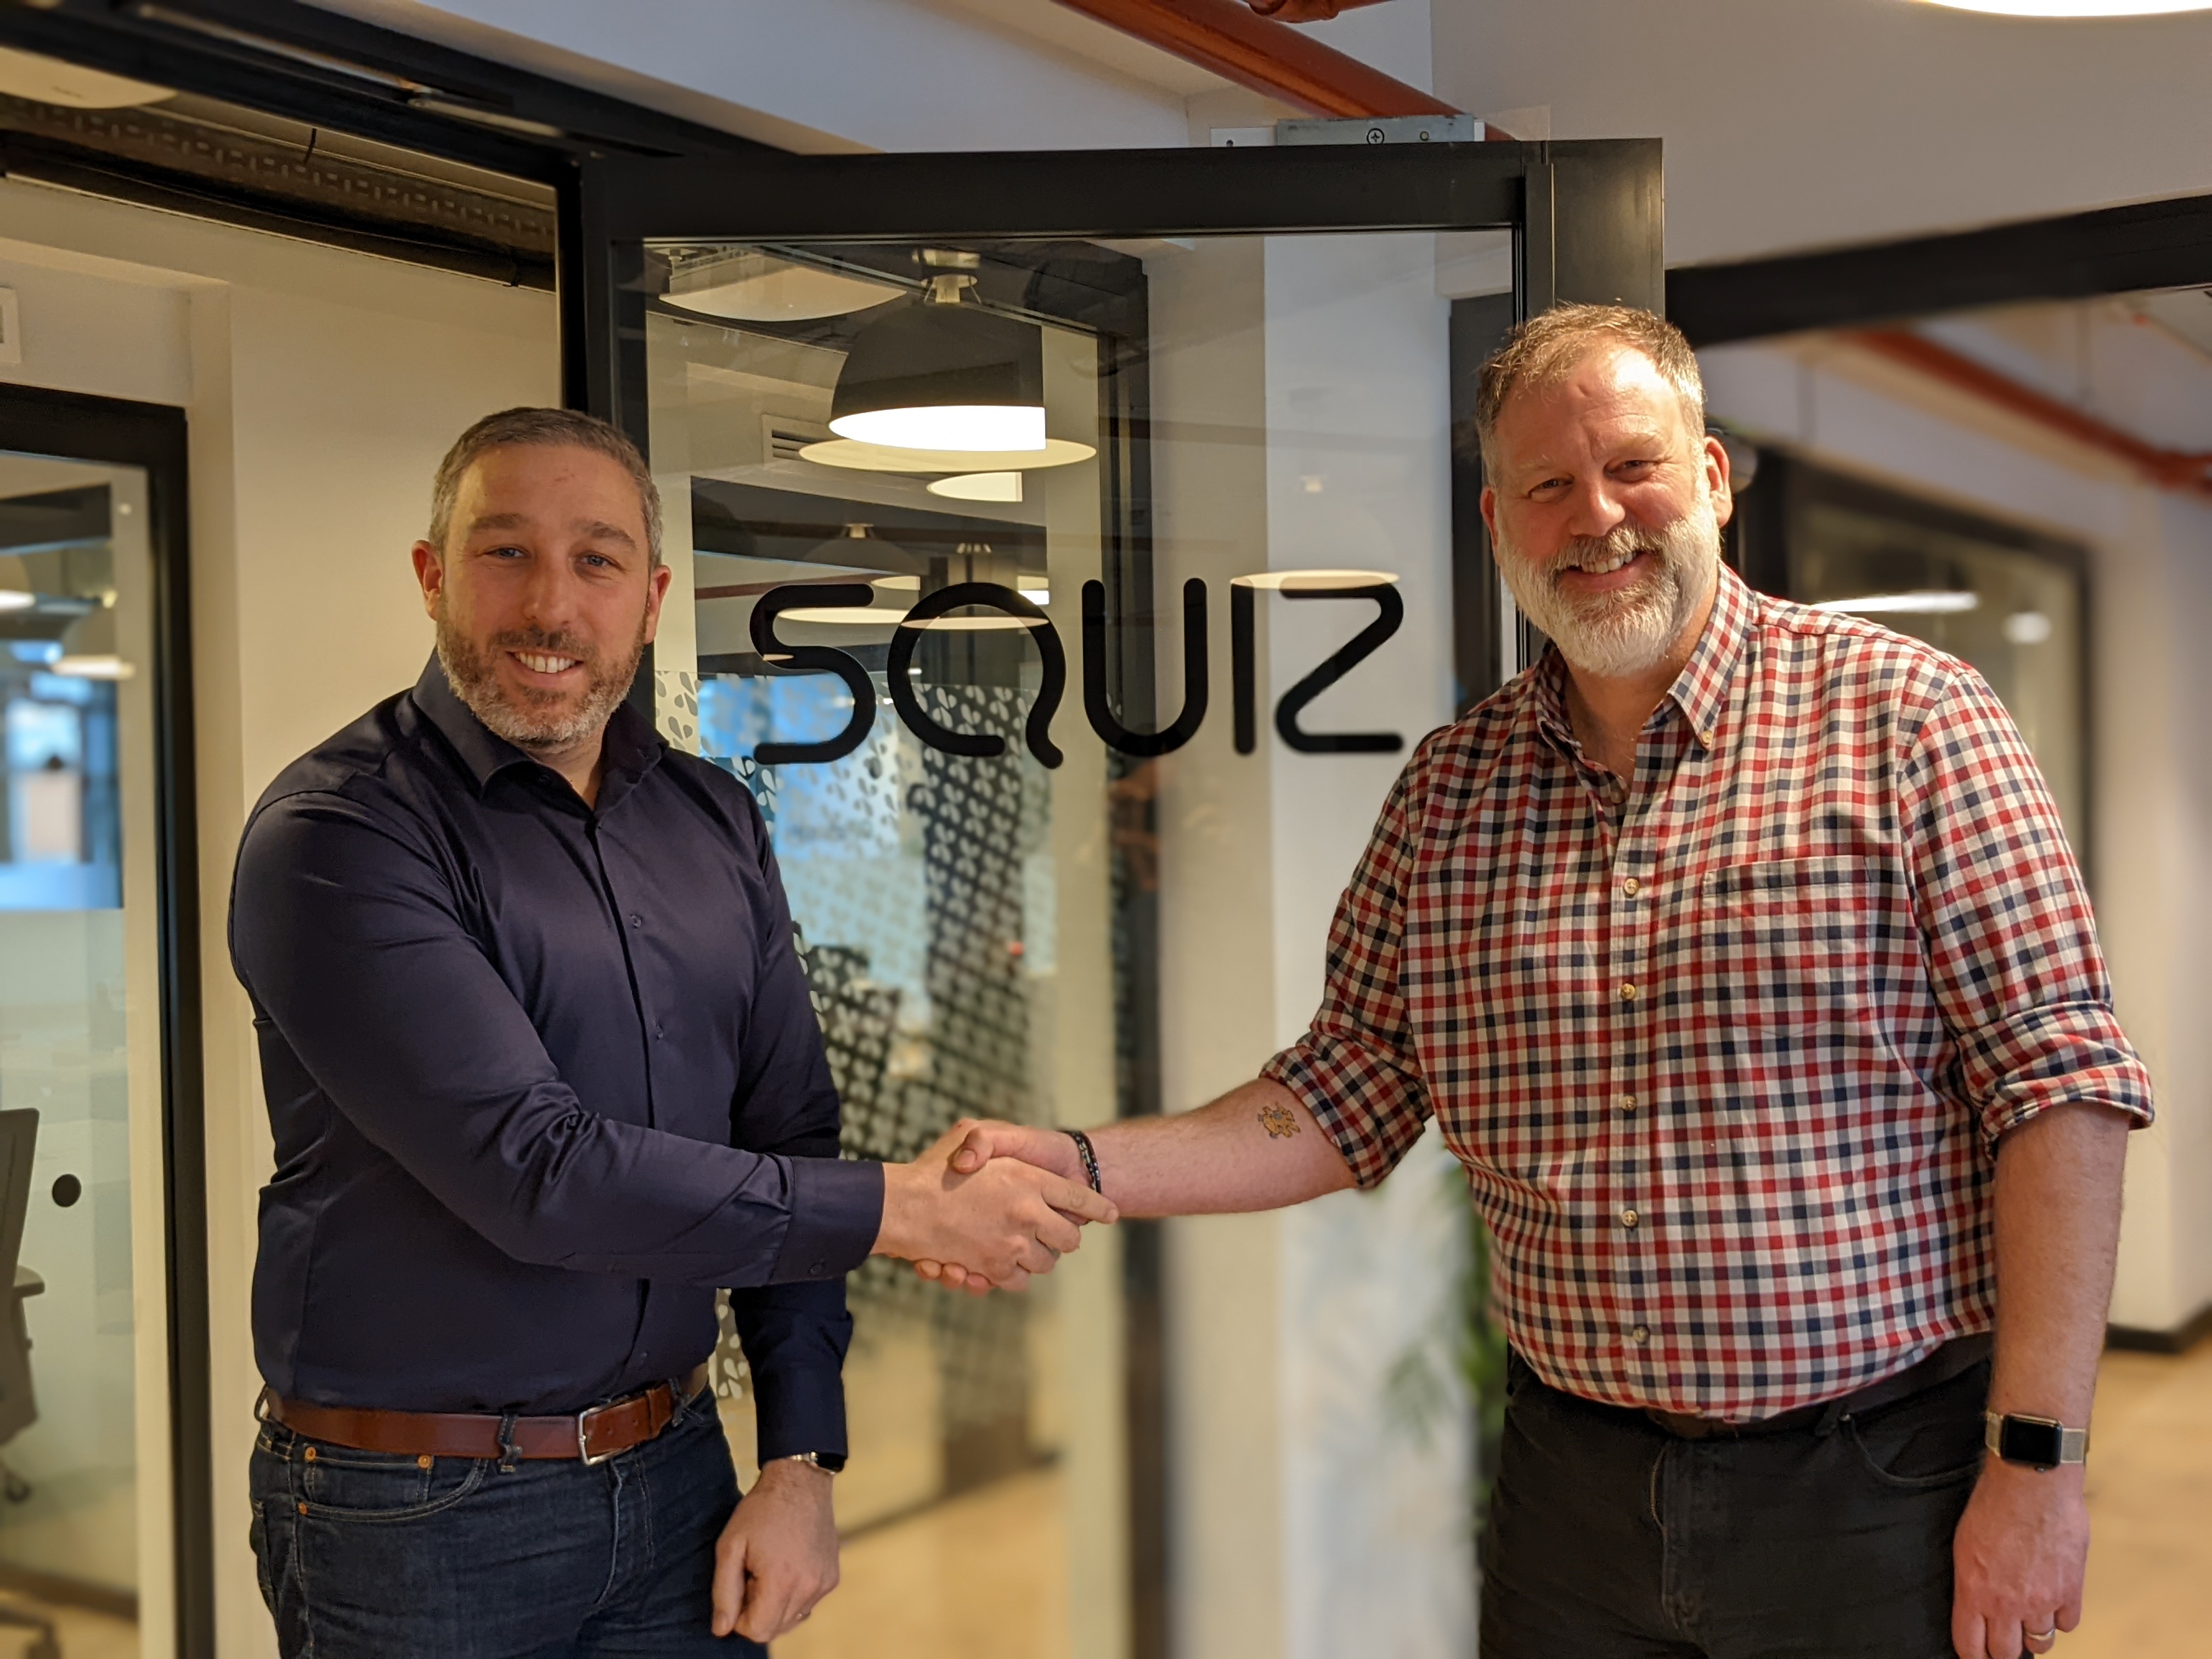 Two men in civilian dress shaking hands in front of a glass door with the company name 'Squiz'.